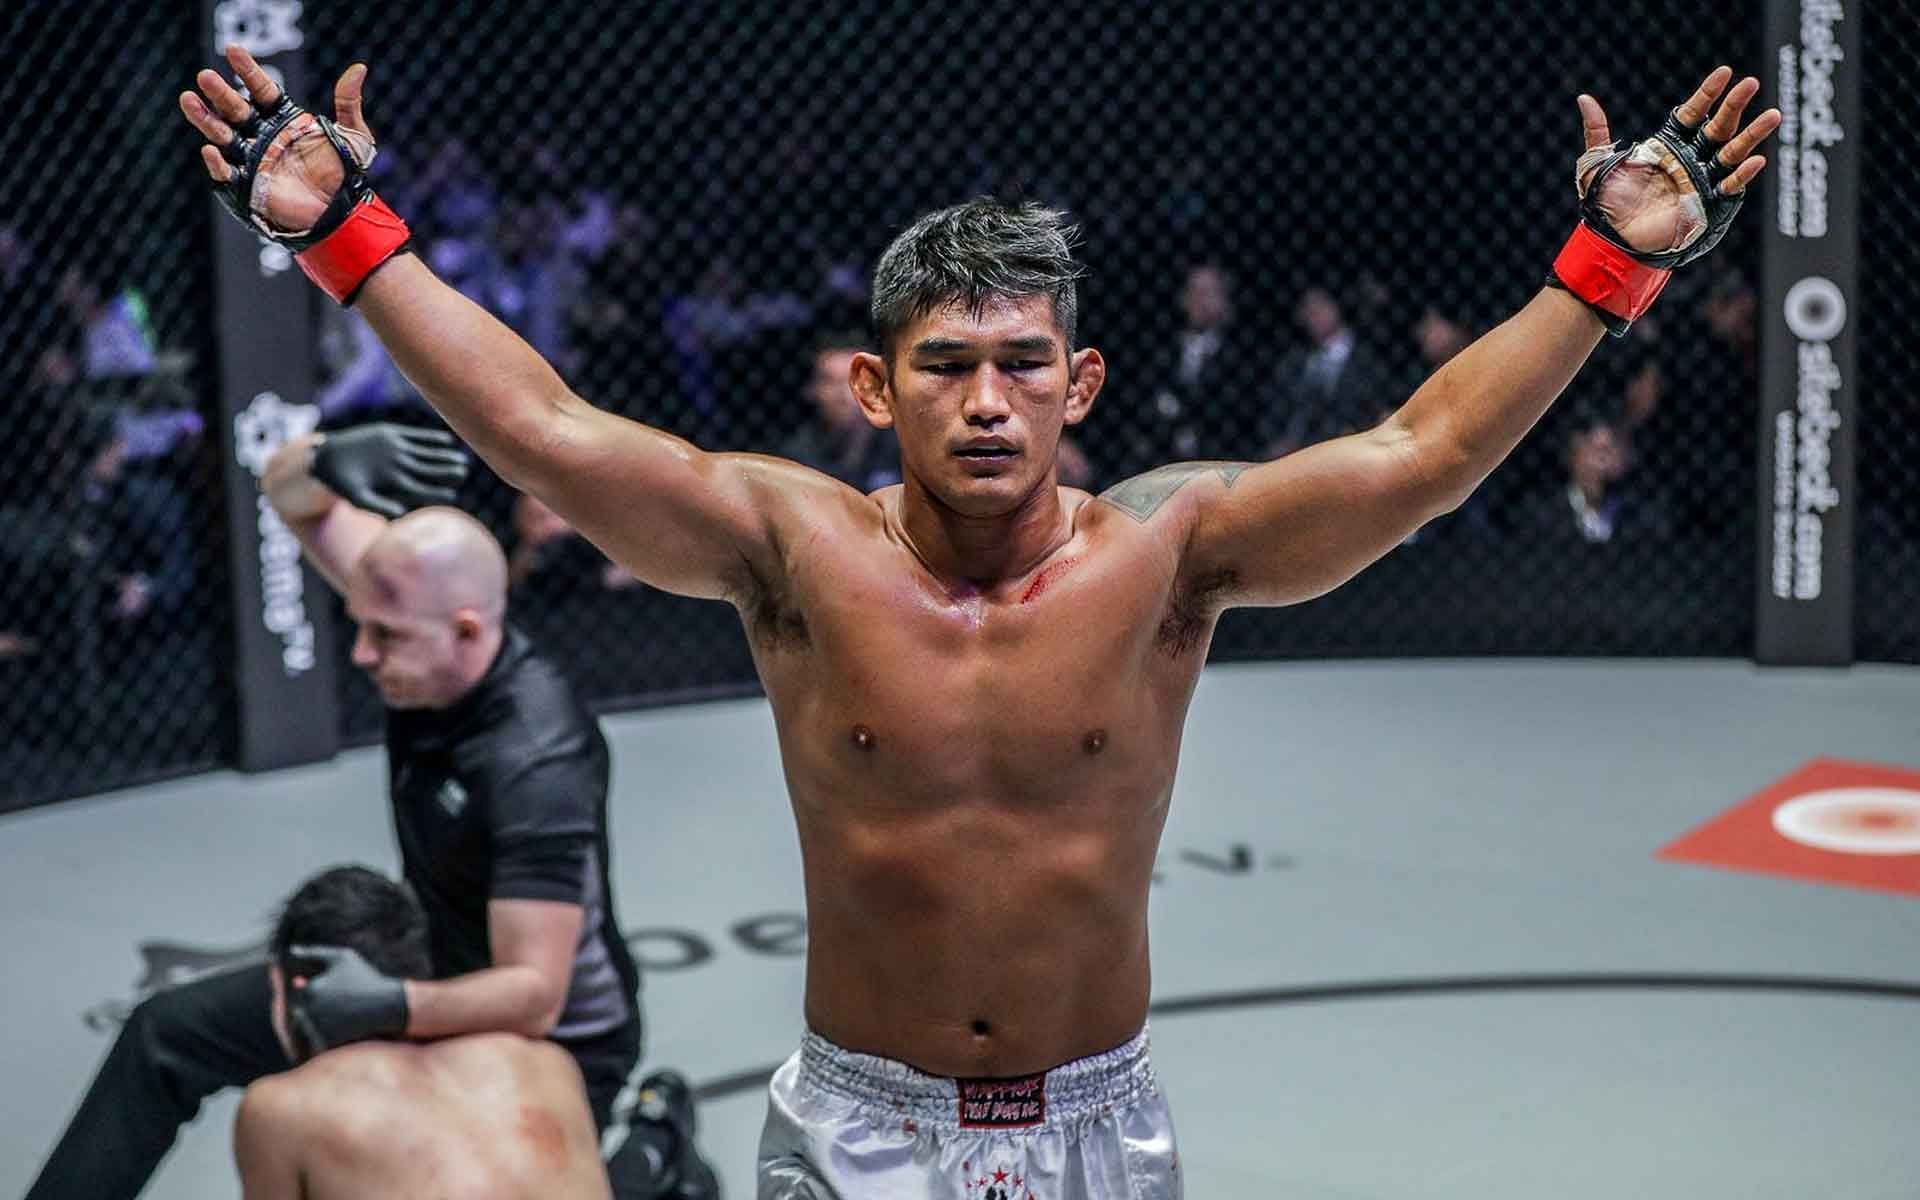 “I think Kiamrian has the tools” – Aung La N Sang predicts the welterweight champion will upset Reinier de Ridder